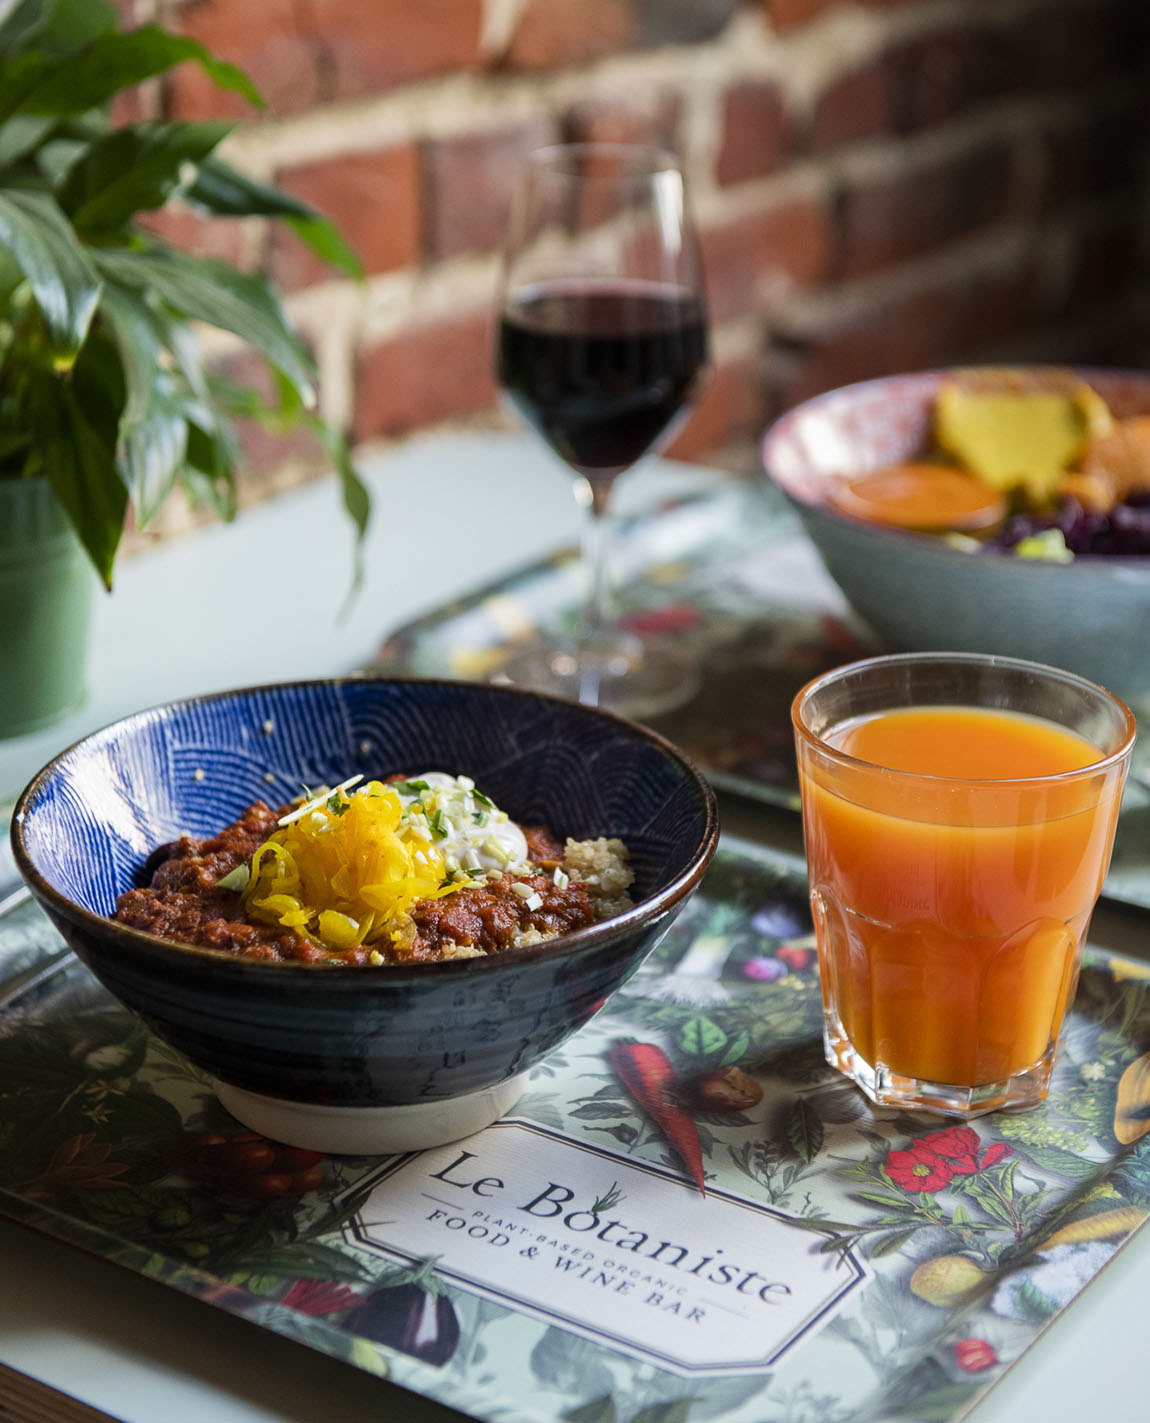 Le Botaniste: Connect with the conscious food evolution